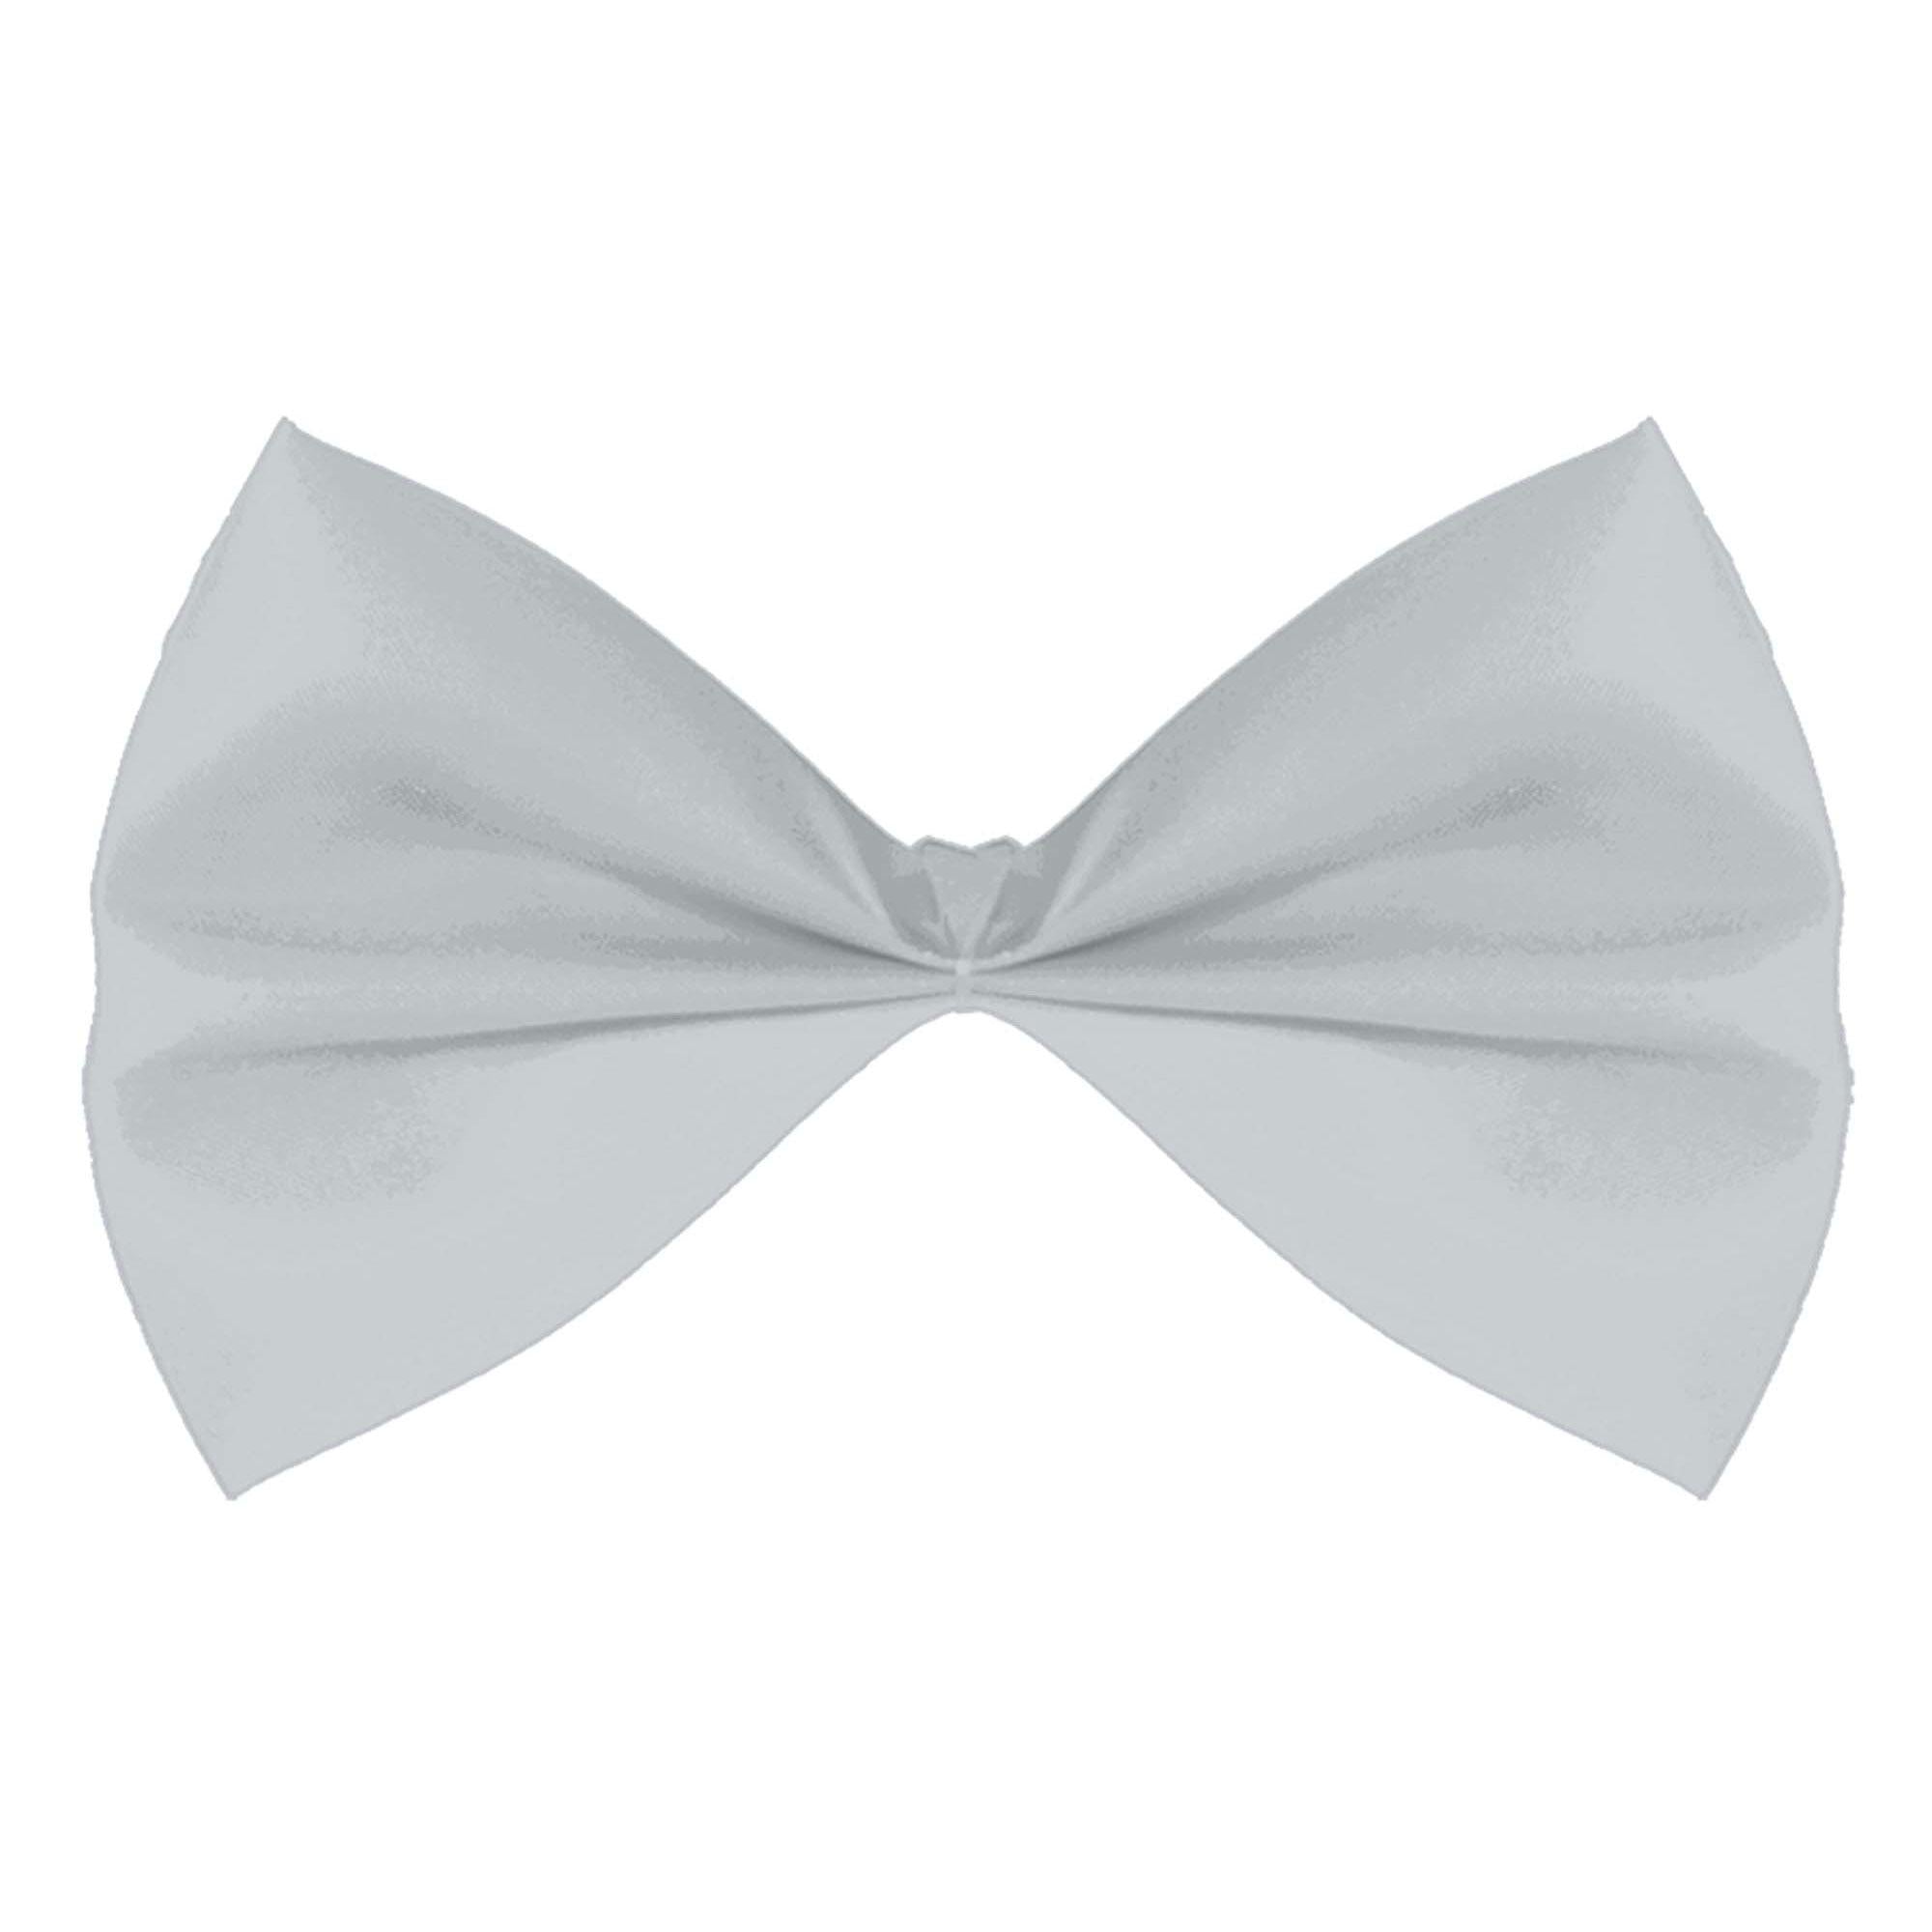 Silver Bow Tie Costumes & Apparel - Party Centre - Party Centre